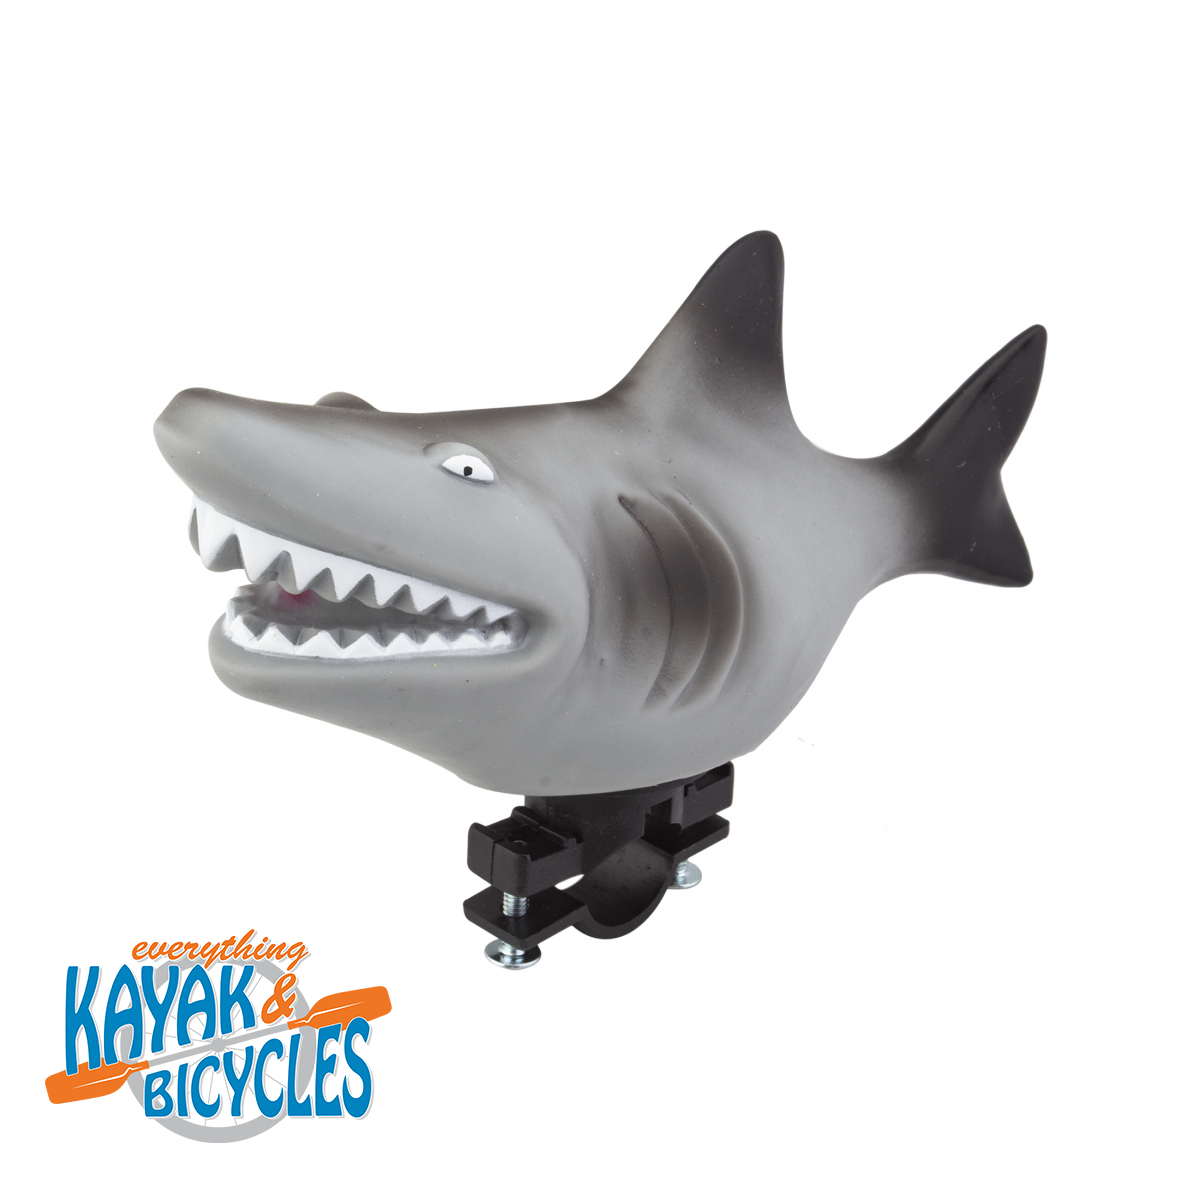 Shark Bike Horn 
Novelty horns that are great for kids and adults alike
Perfect for novice riders as well as serious riders who like a little flair, personality, or humor for their group rides
Fits most handlebars